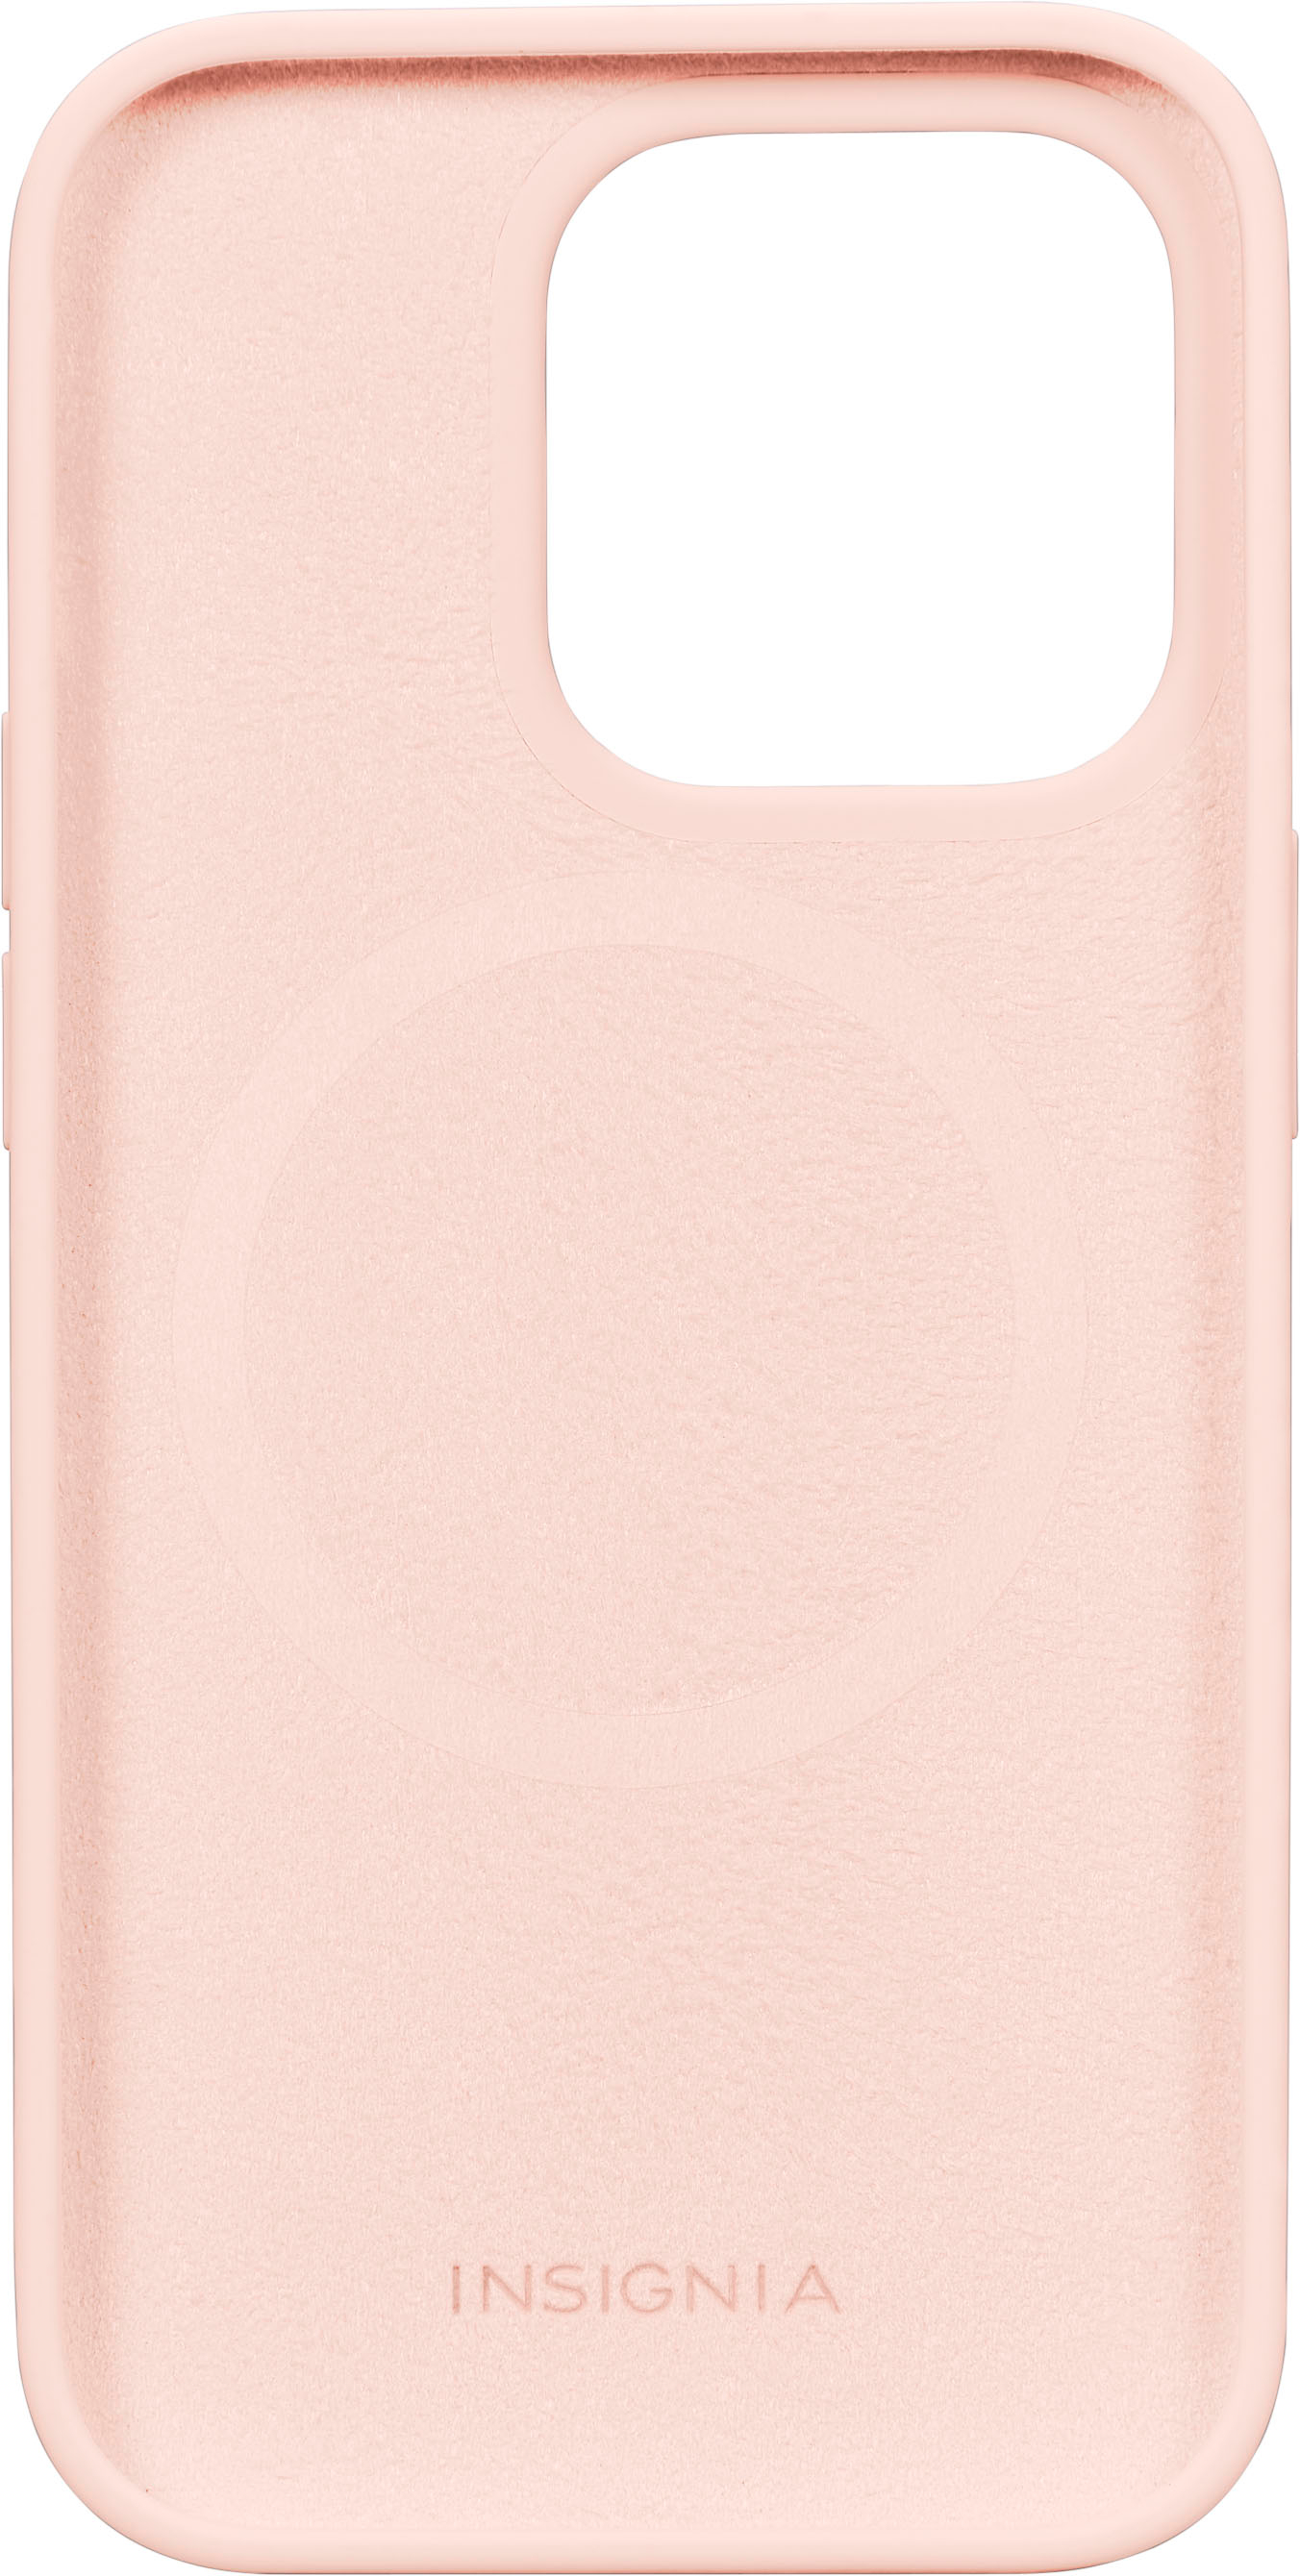 Insignia - Liquid Silicone Case with MagSafe for iPhone 14 Pro - Lavender